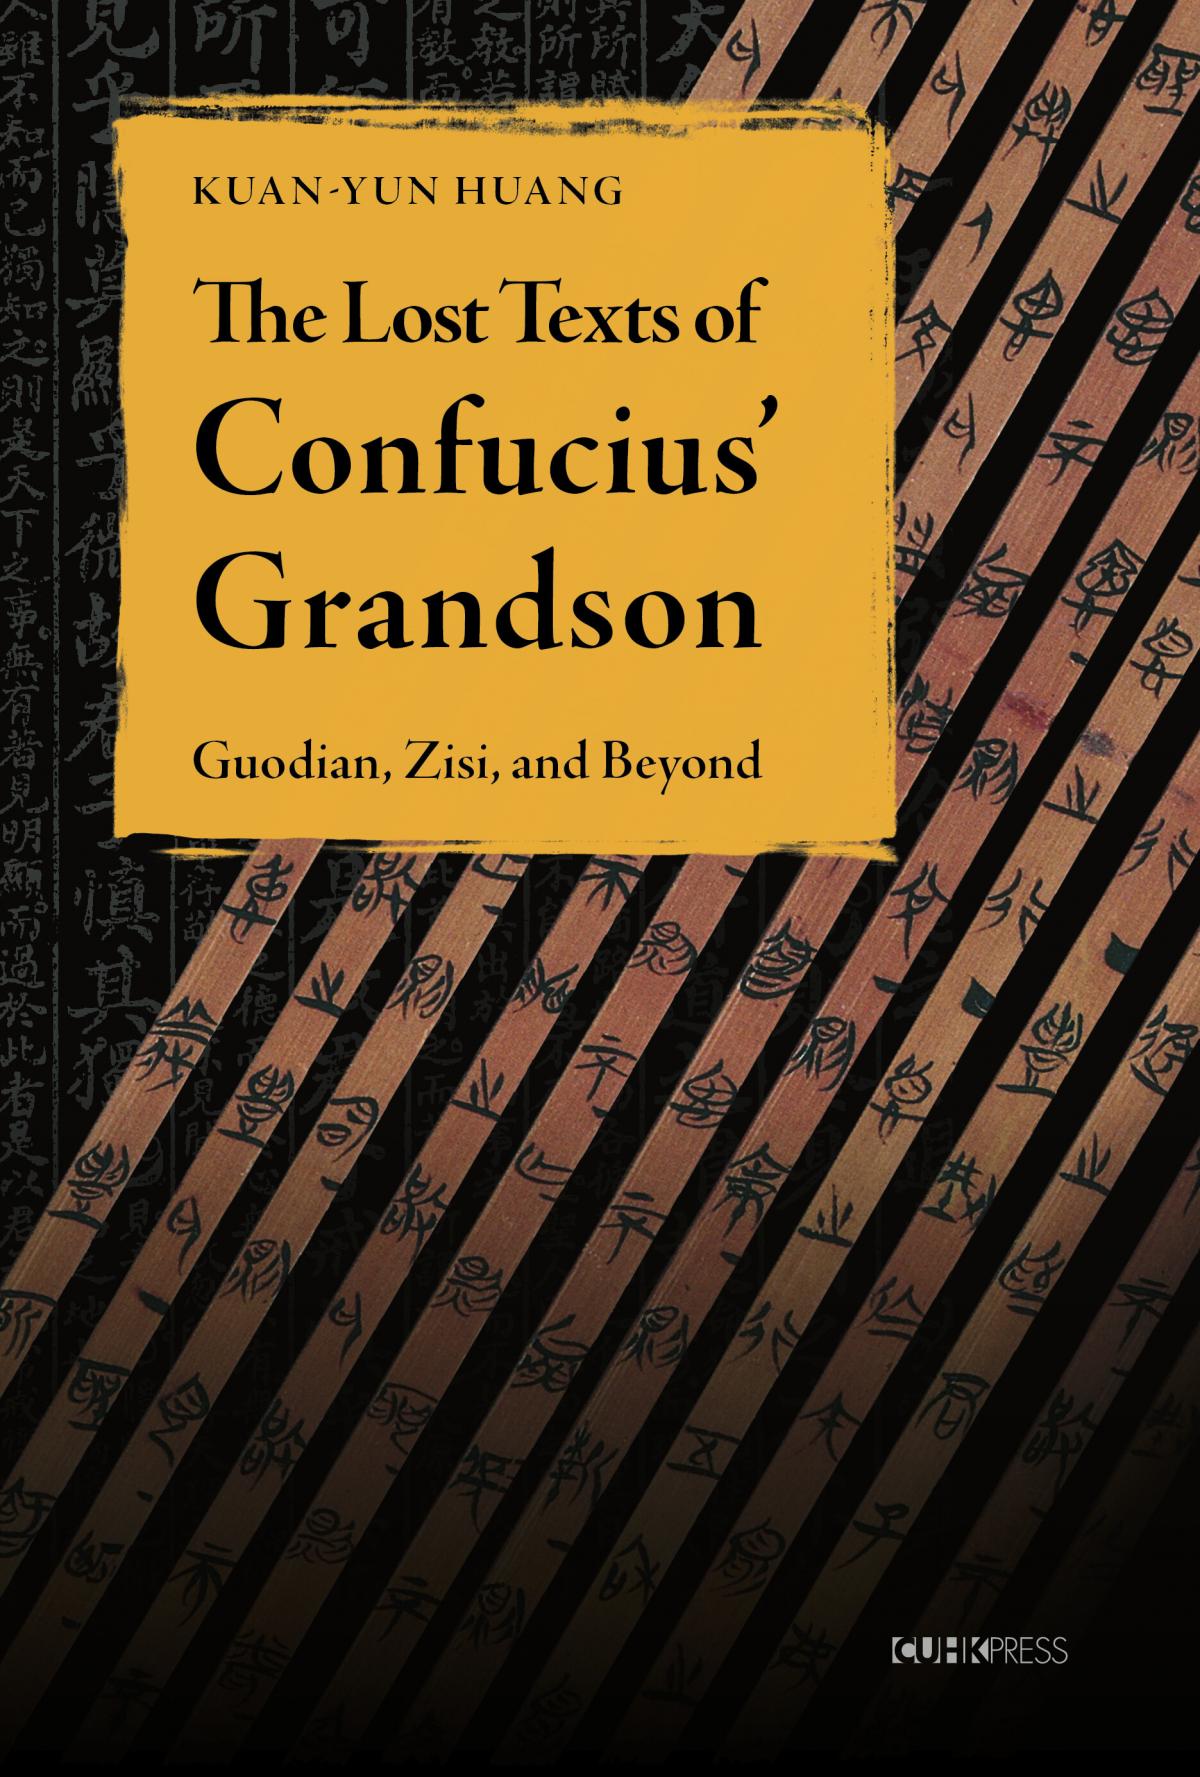 The Lost Texts of Confucius’ Grandson: Guodian, Zisi, and Beyond︱By Kuan-yun Huang